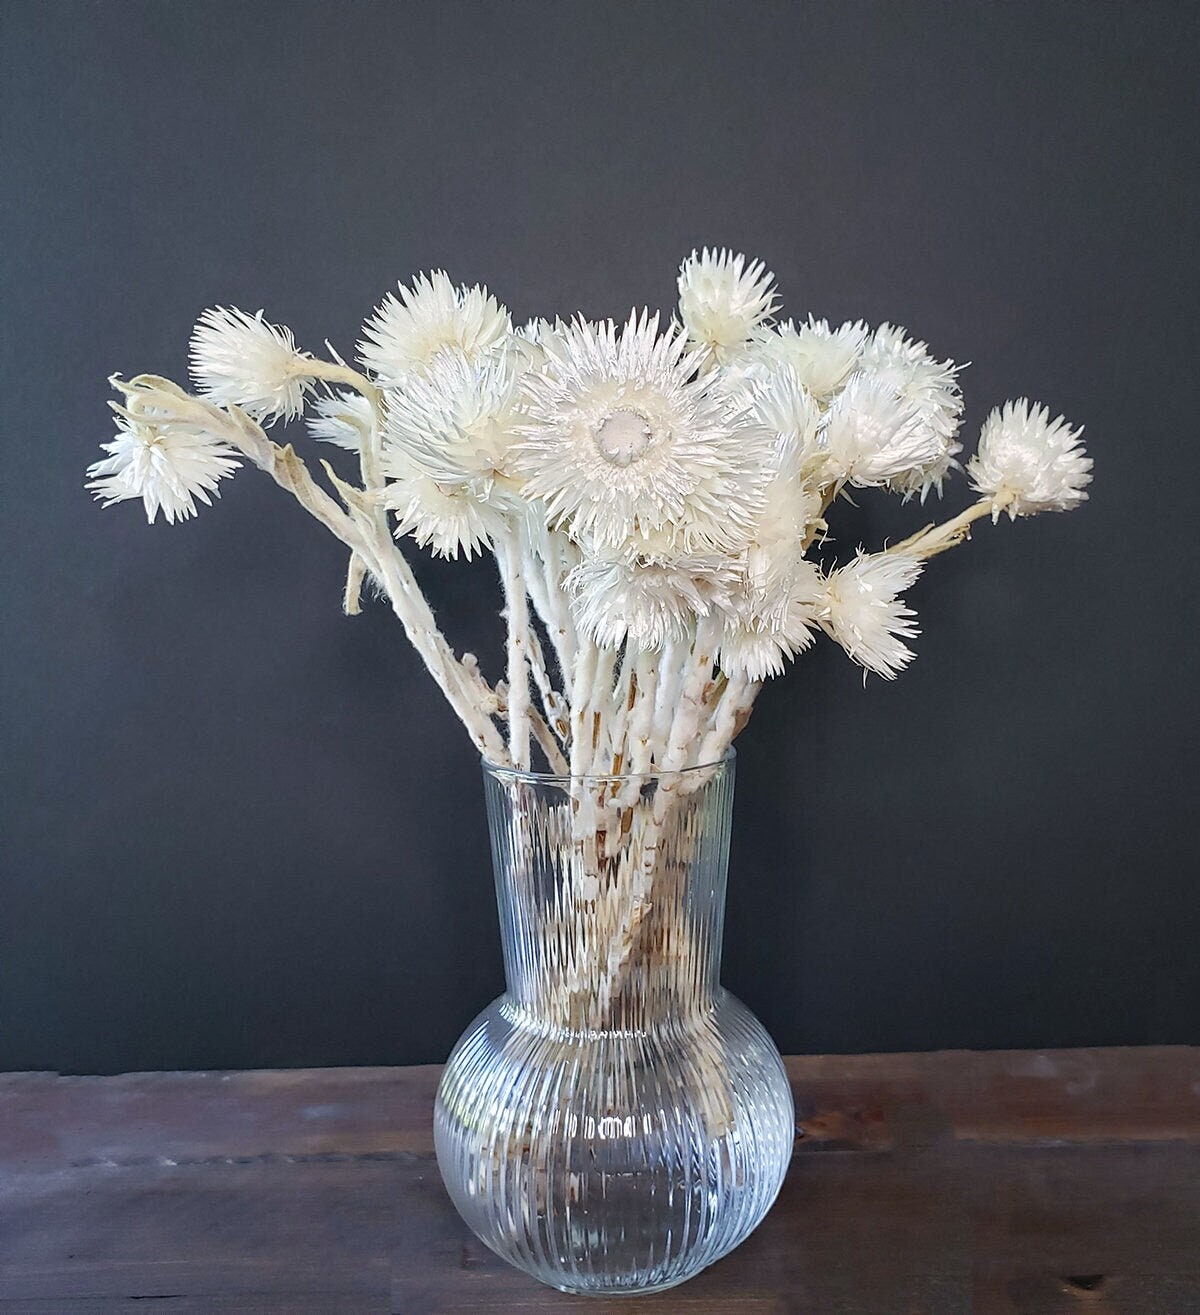 Dried White Everlasting Straw Flowers Natural White Daisies Dry Florals  Winter Snow White Helichrysums White Flower Arrangement 